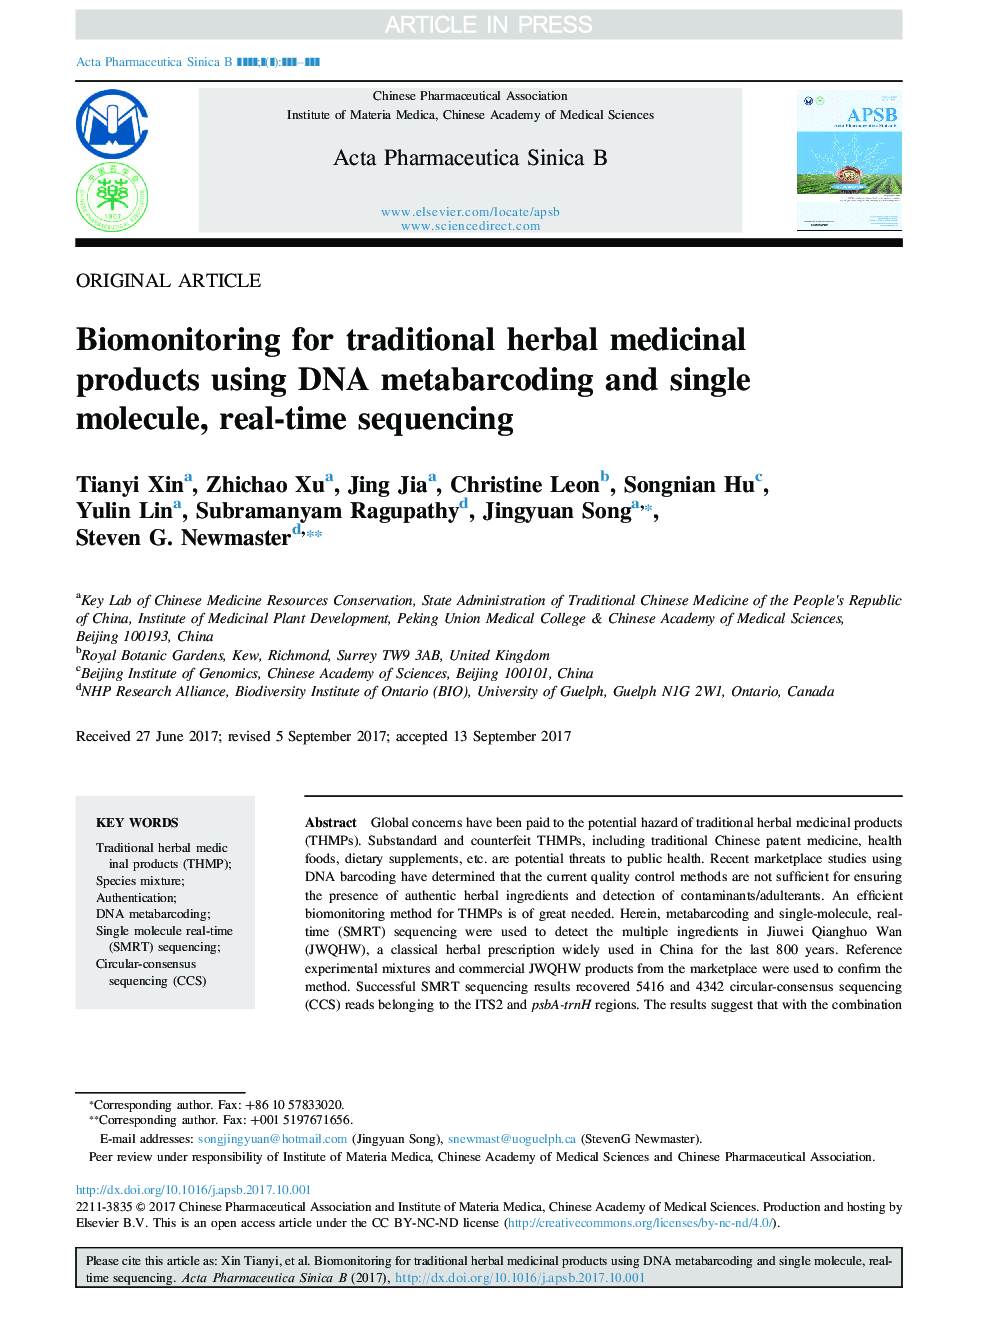 Biomonitoring for traditional herbal medicinal products using DNA metabarcoding and single molecule, real-time sequencing